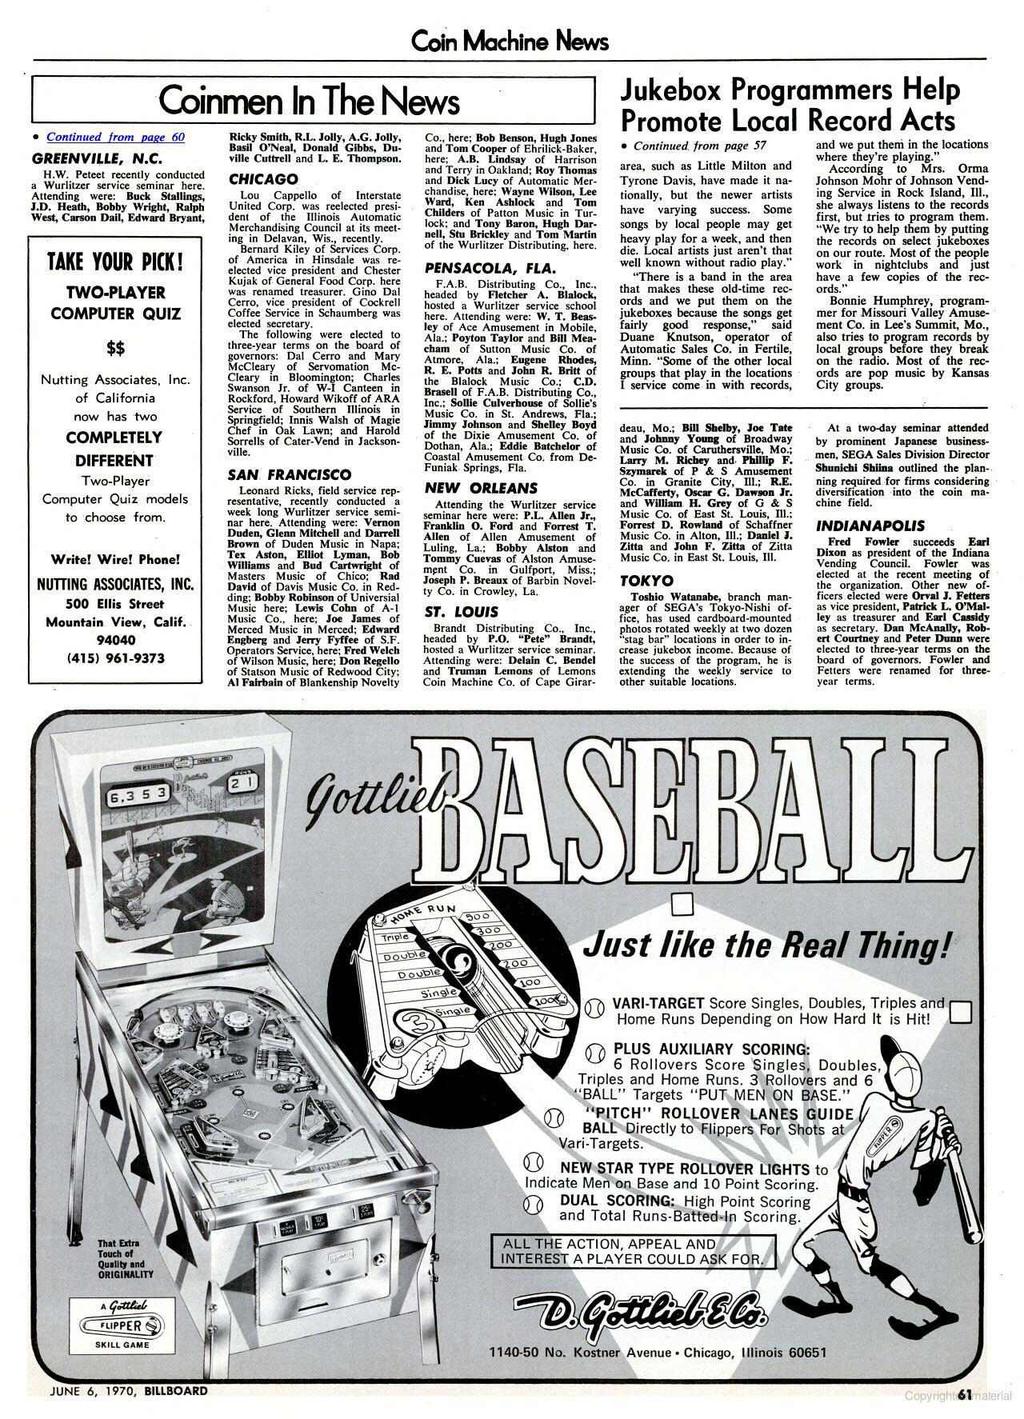 Coin Machine News Continued from page 60 GREENVILLE, N.C. H.W. Peteet recently conducted a Wurlitzer service seminar here. Attending were: Buck Stalinists, J.D.